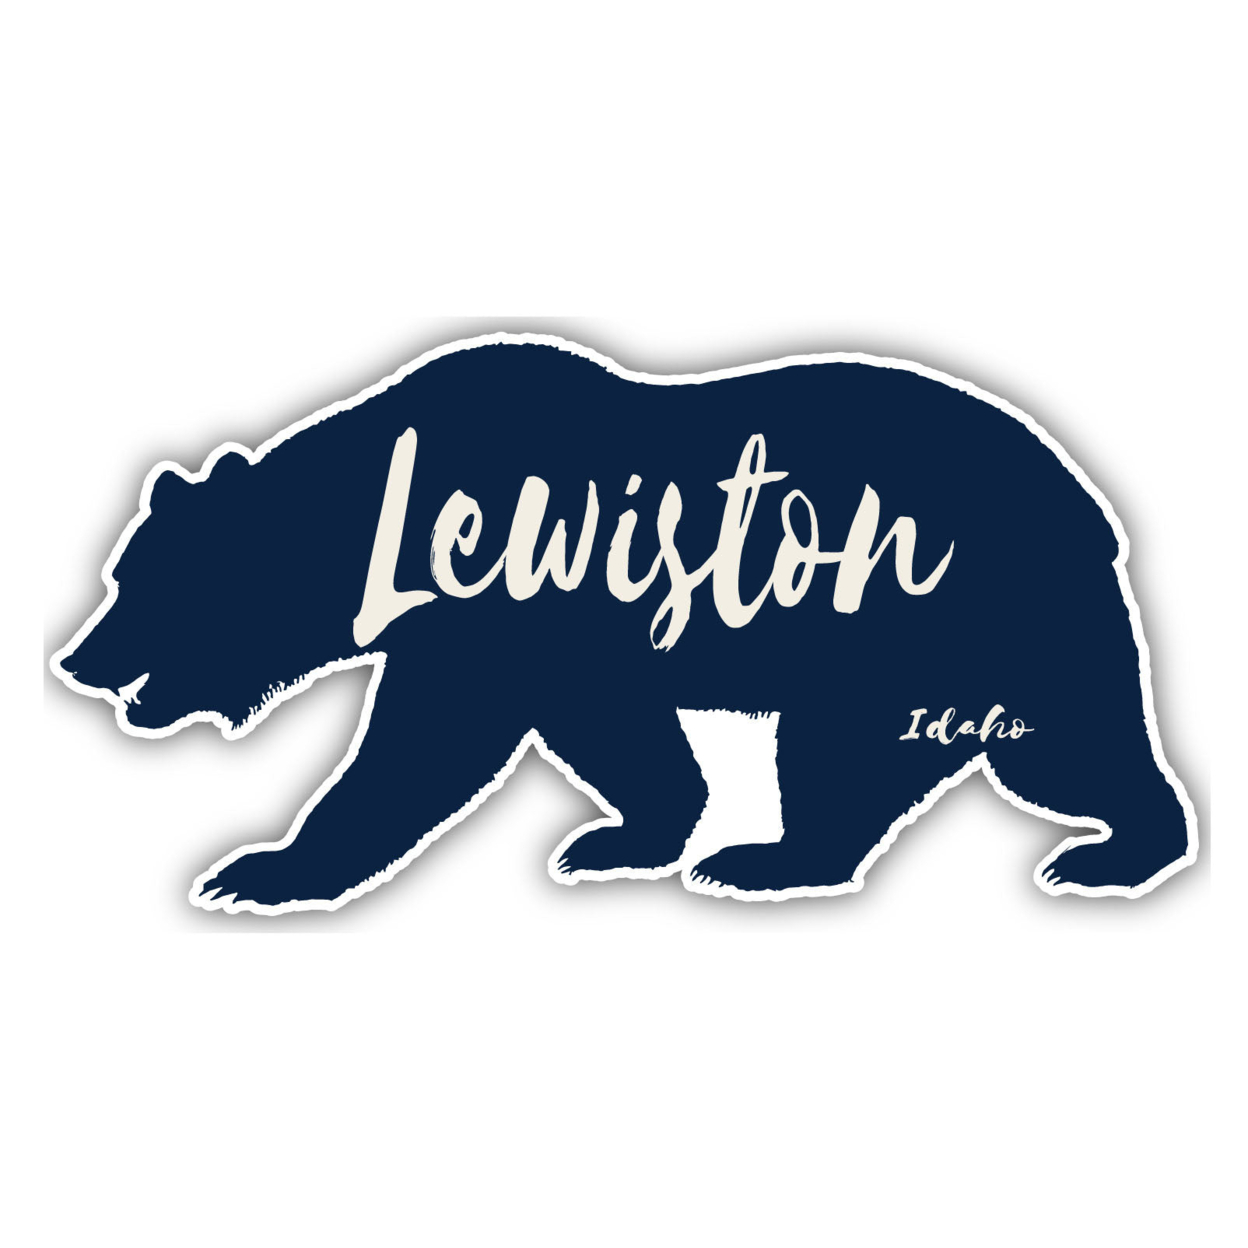 Lewiston Idaho Souvenir Decorative Stickers (Choose Theme And Size) - 2-Inch, Great Outdoors